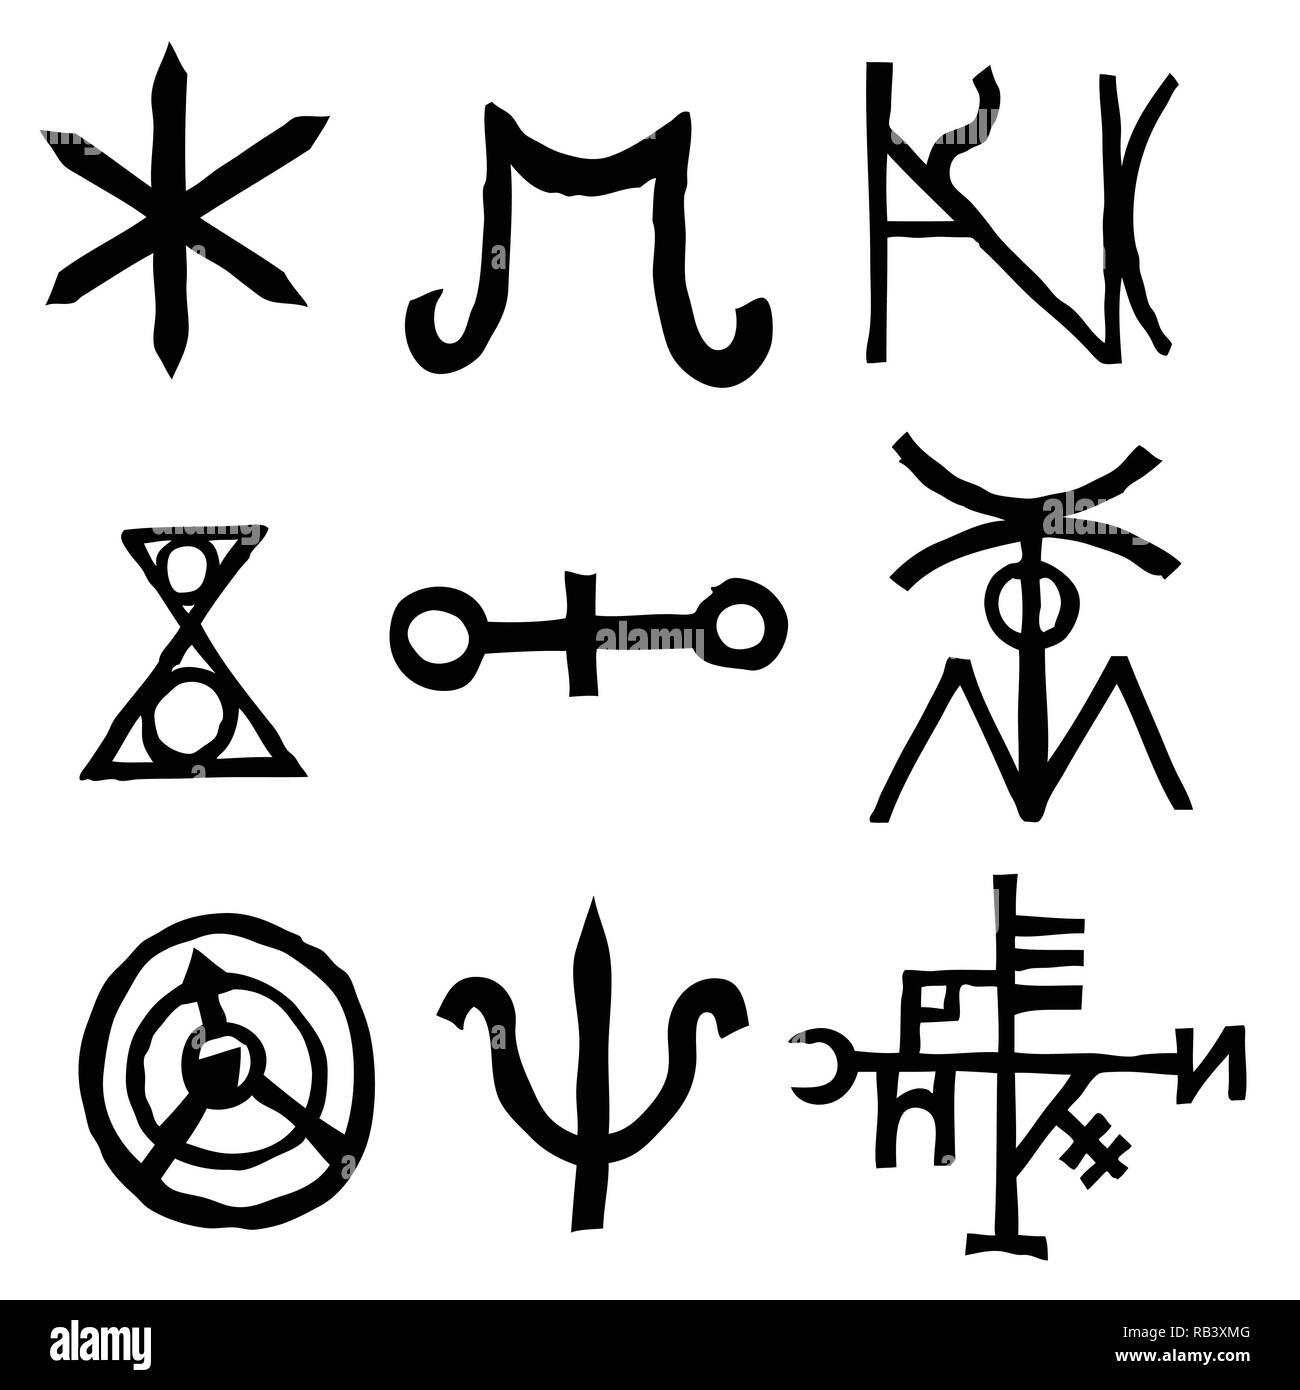 Set of written symbols and letters inspired by magical inscriptions and ...